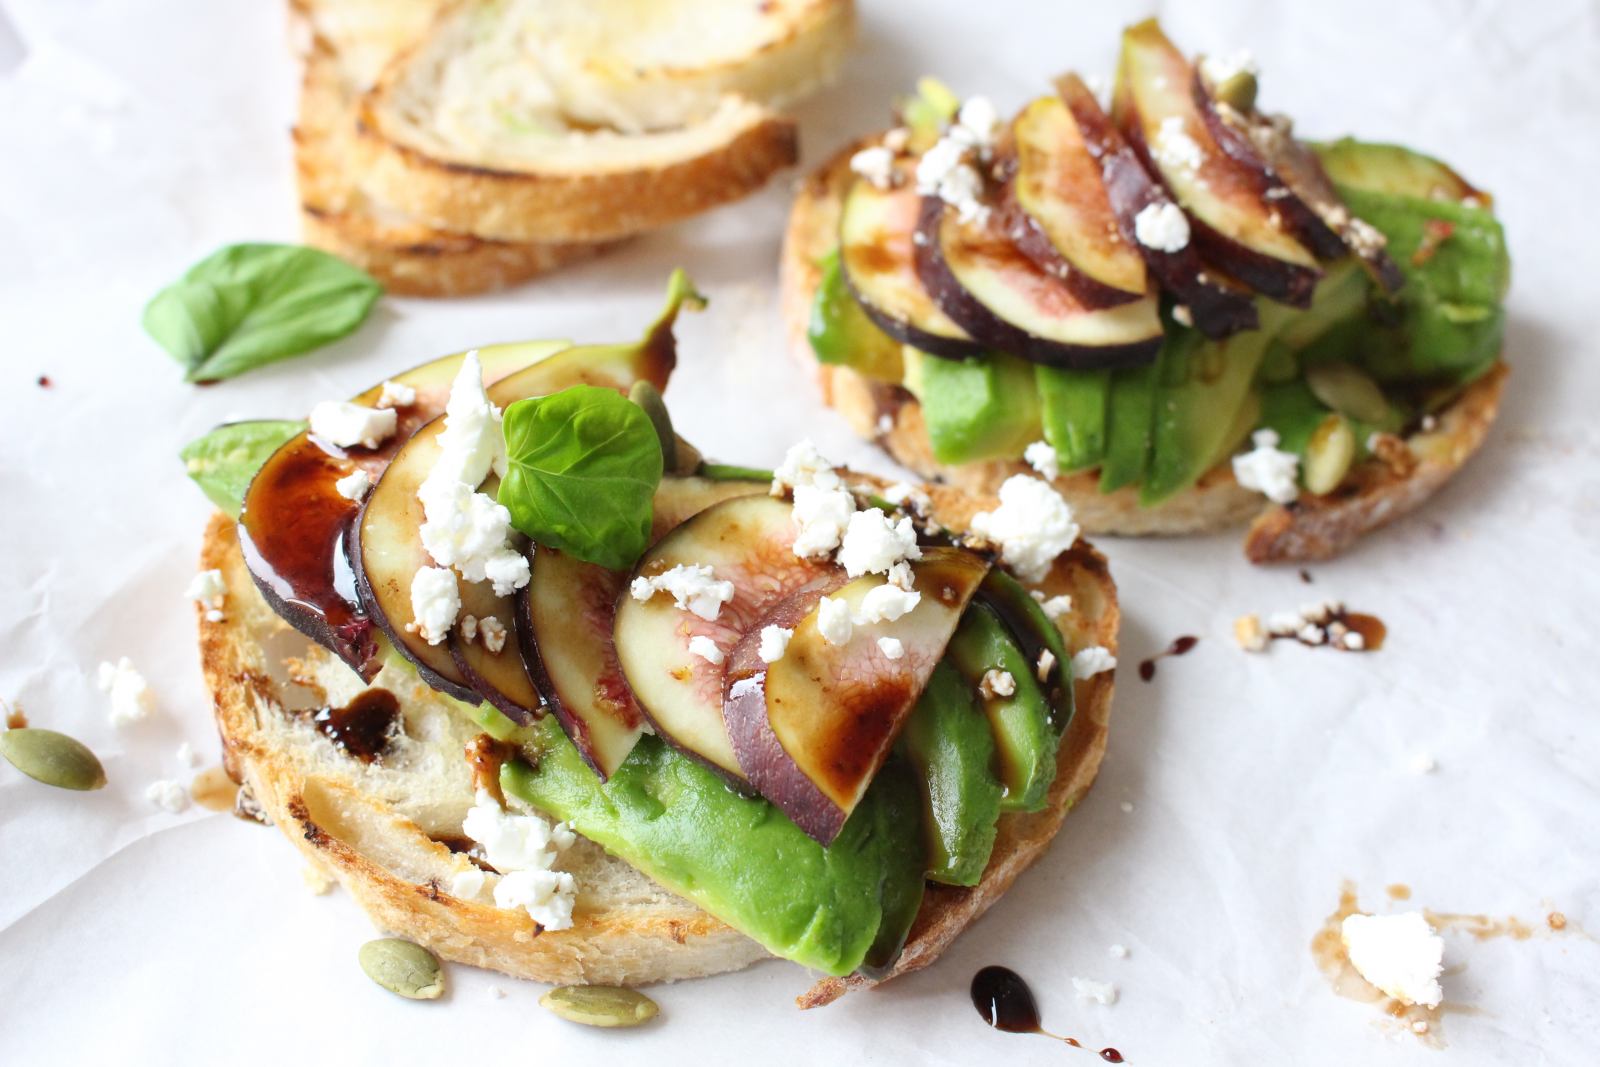 Avocado On Toast With Fresh Figs And Balsamic Reduction